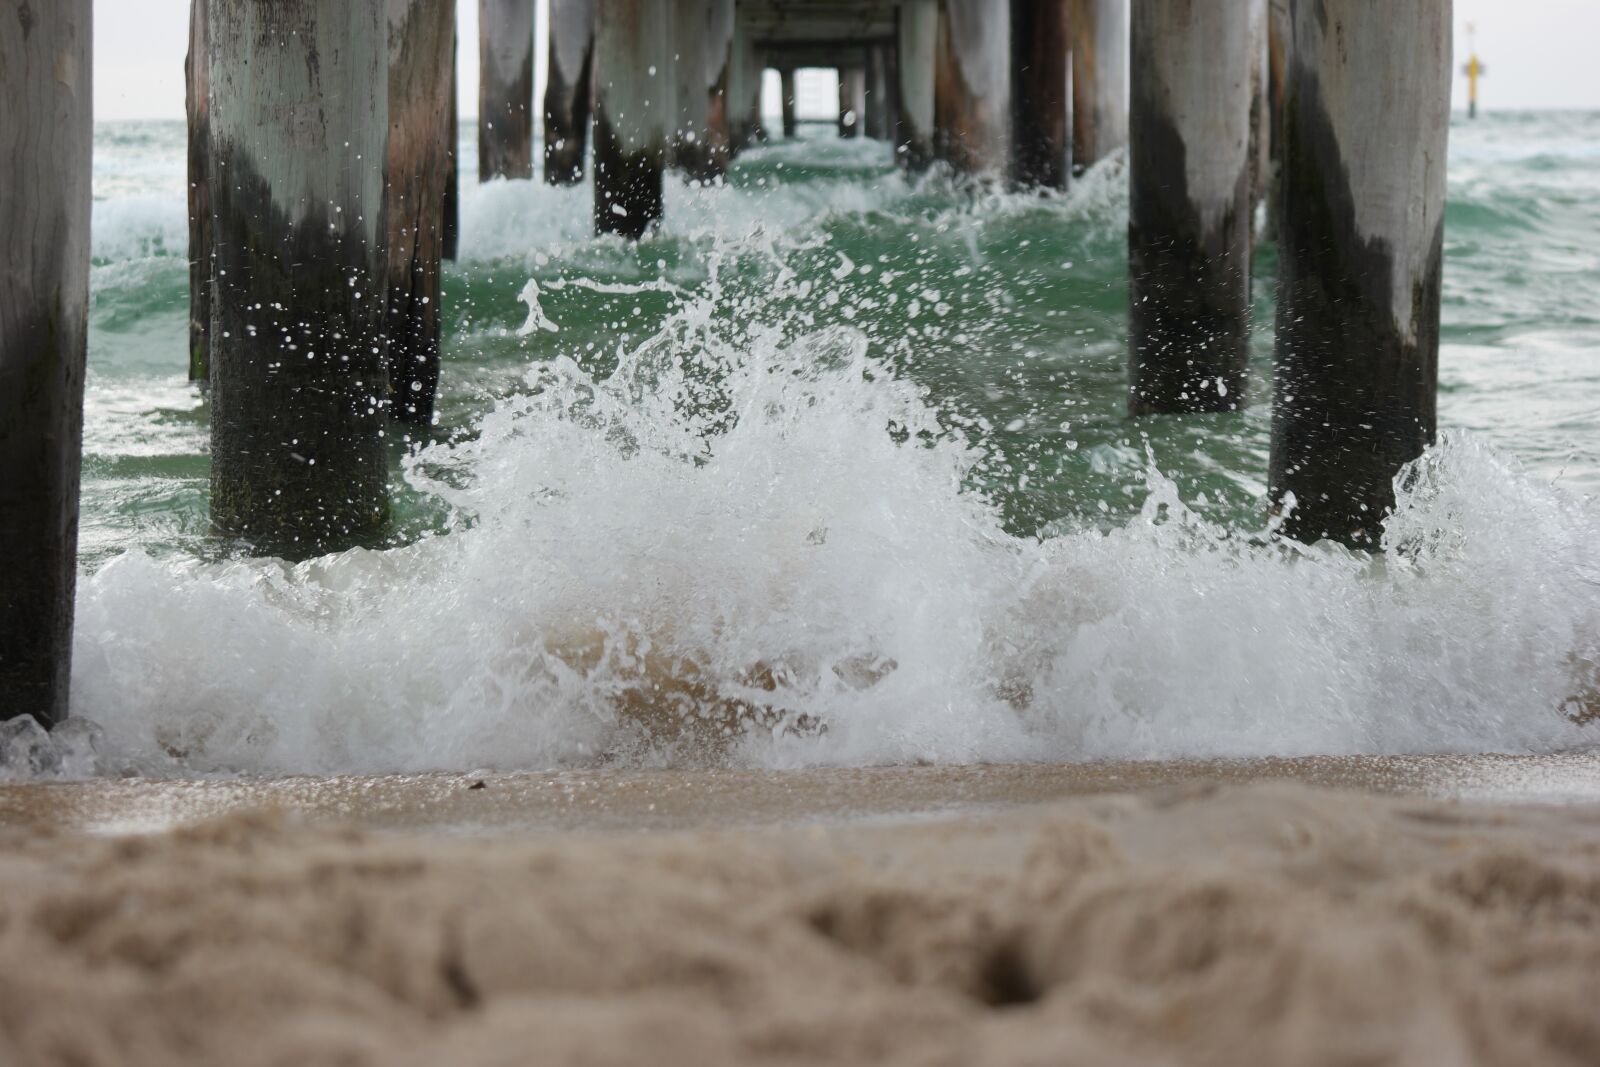 Samsung NX500 sample photo. Waves breaking, waves under photography